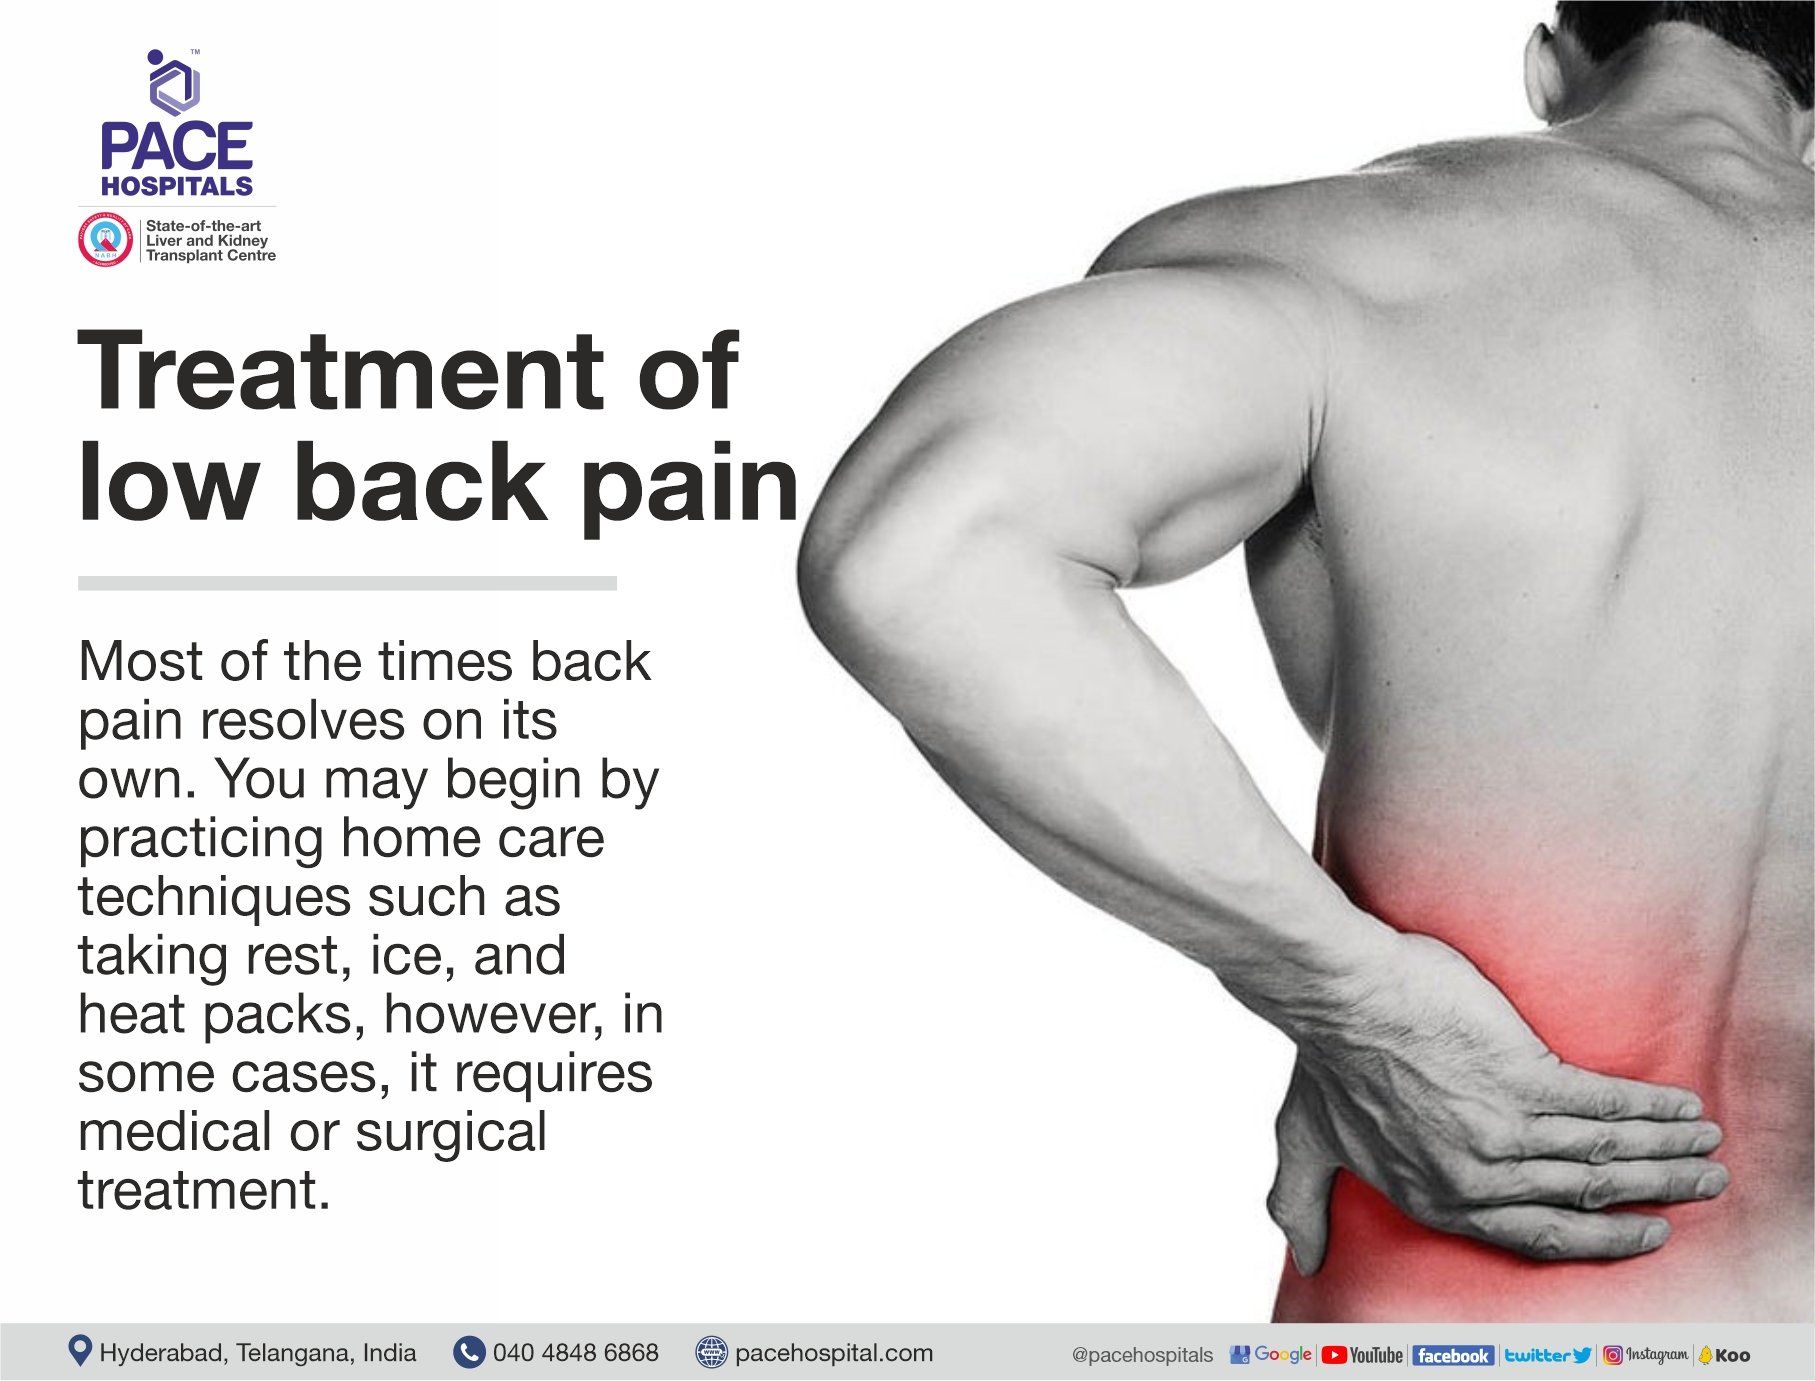 Treatment of low back pain | Pace Hospitals